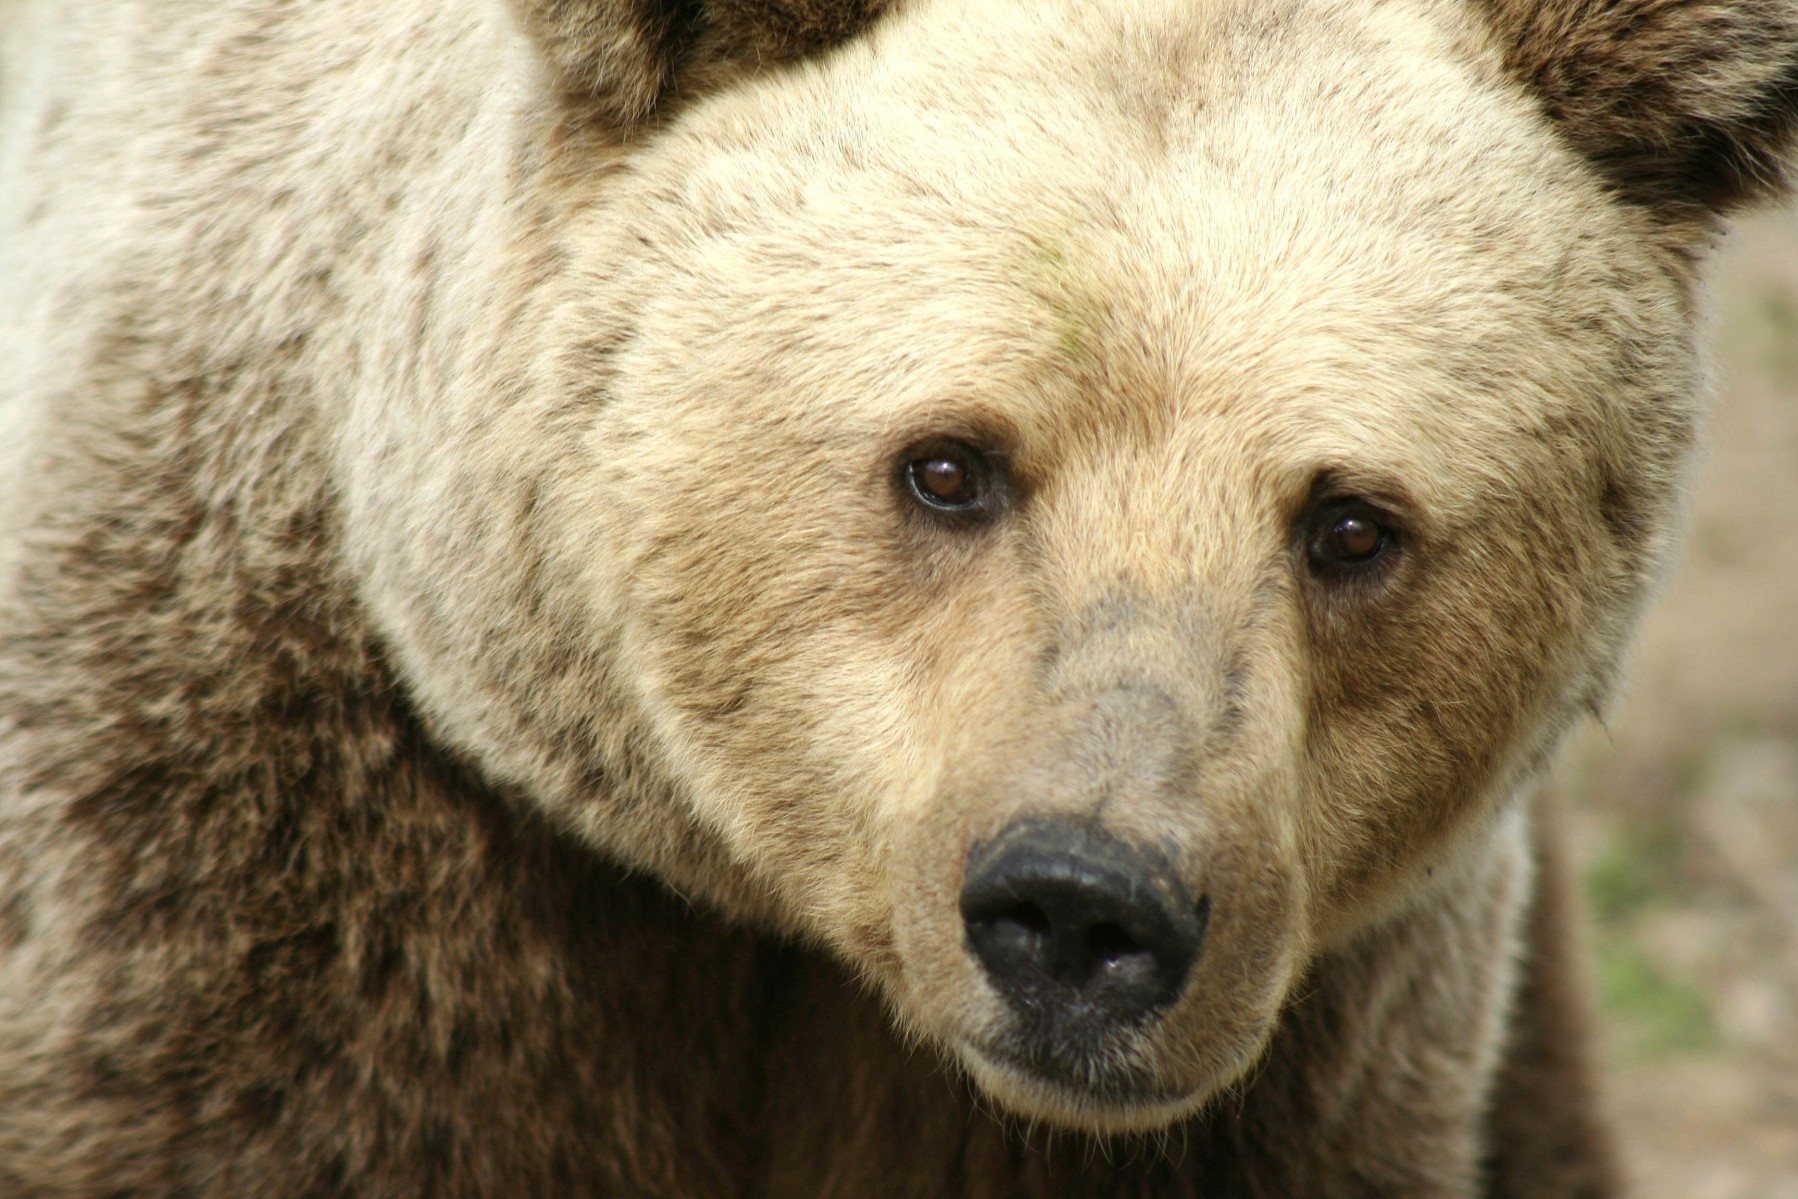 Pictured: A close-up of a resident bear at the Romanian Bear Sanctuary in Zarnesti, Romania.